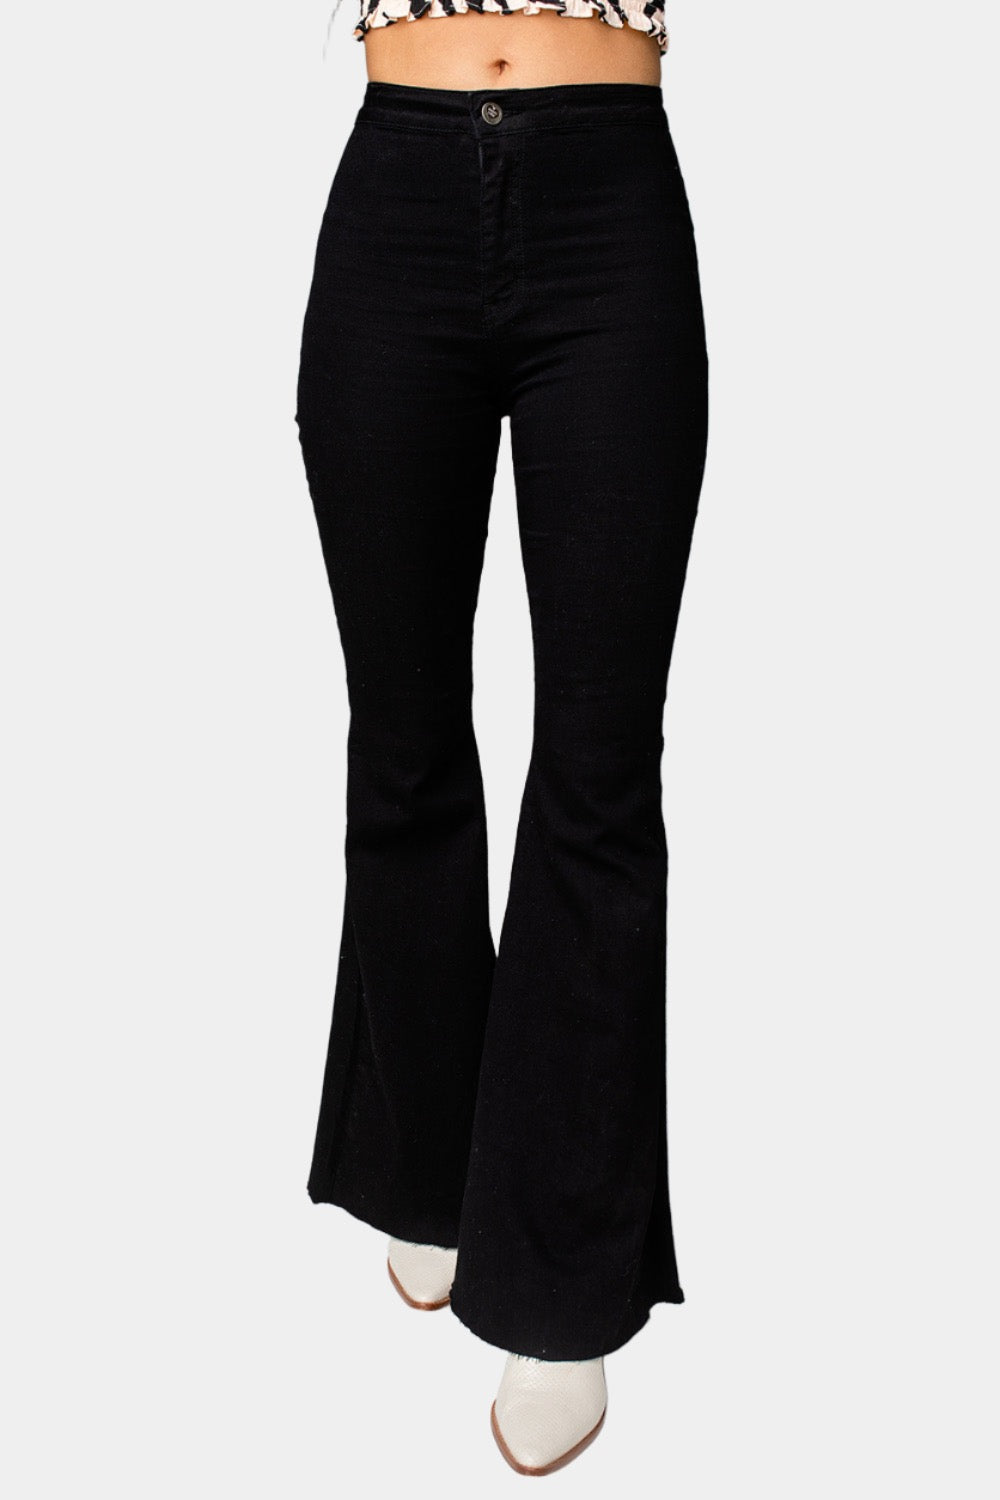 flare pants high waist flare jeans flared pants bell bottom pants